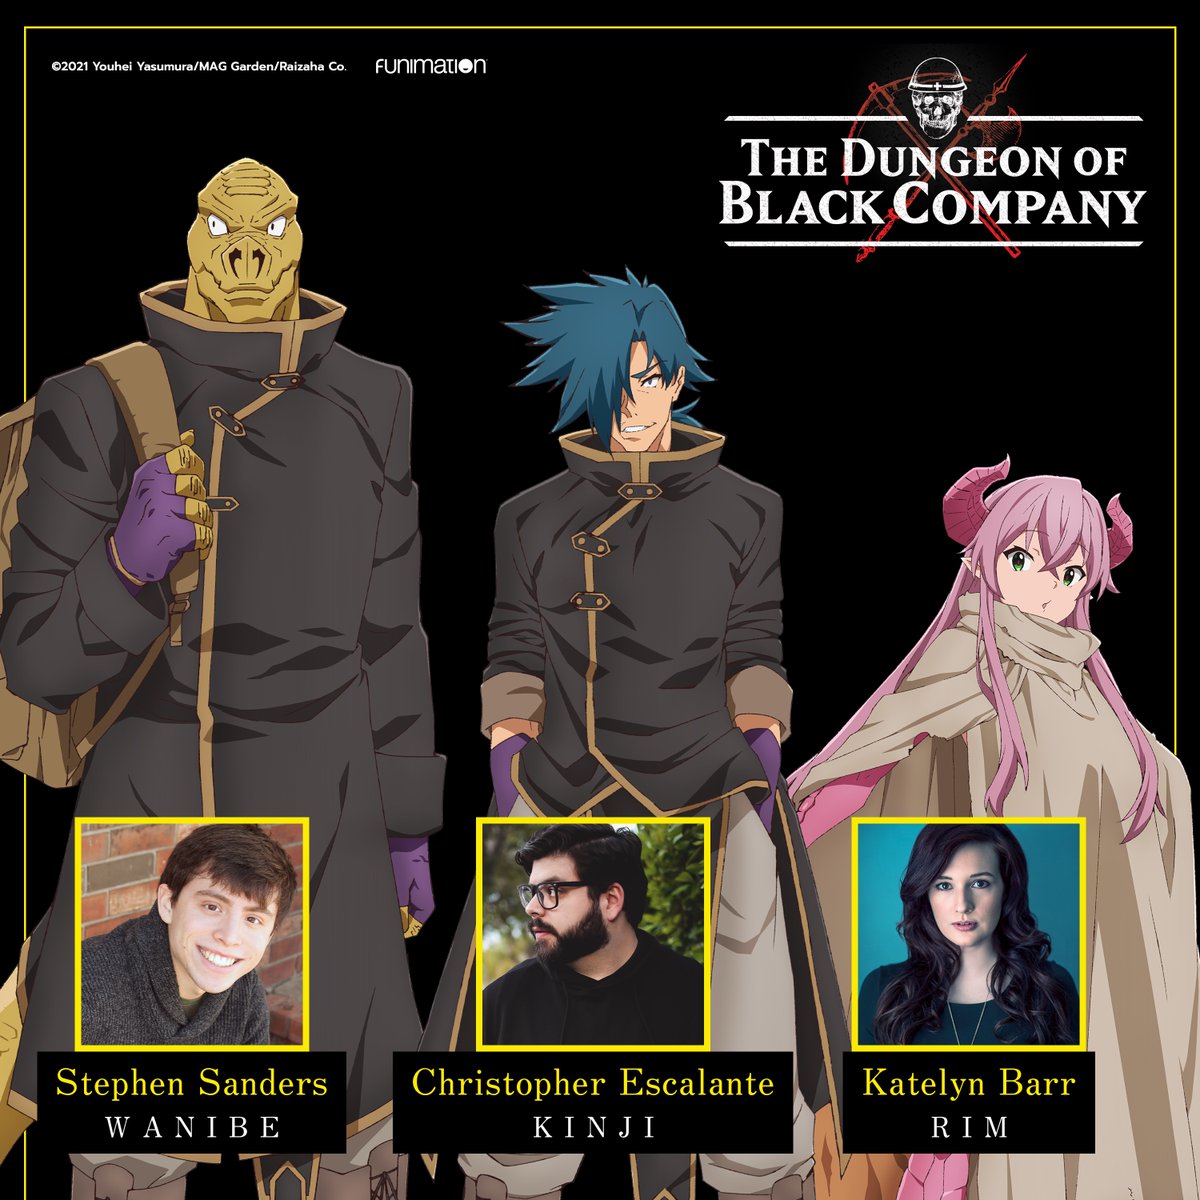 The Dungeon of Black Company